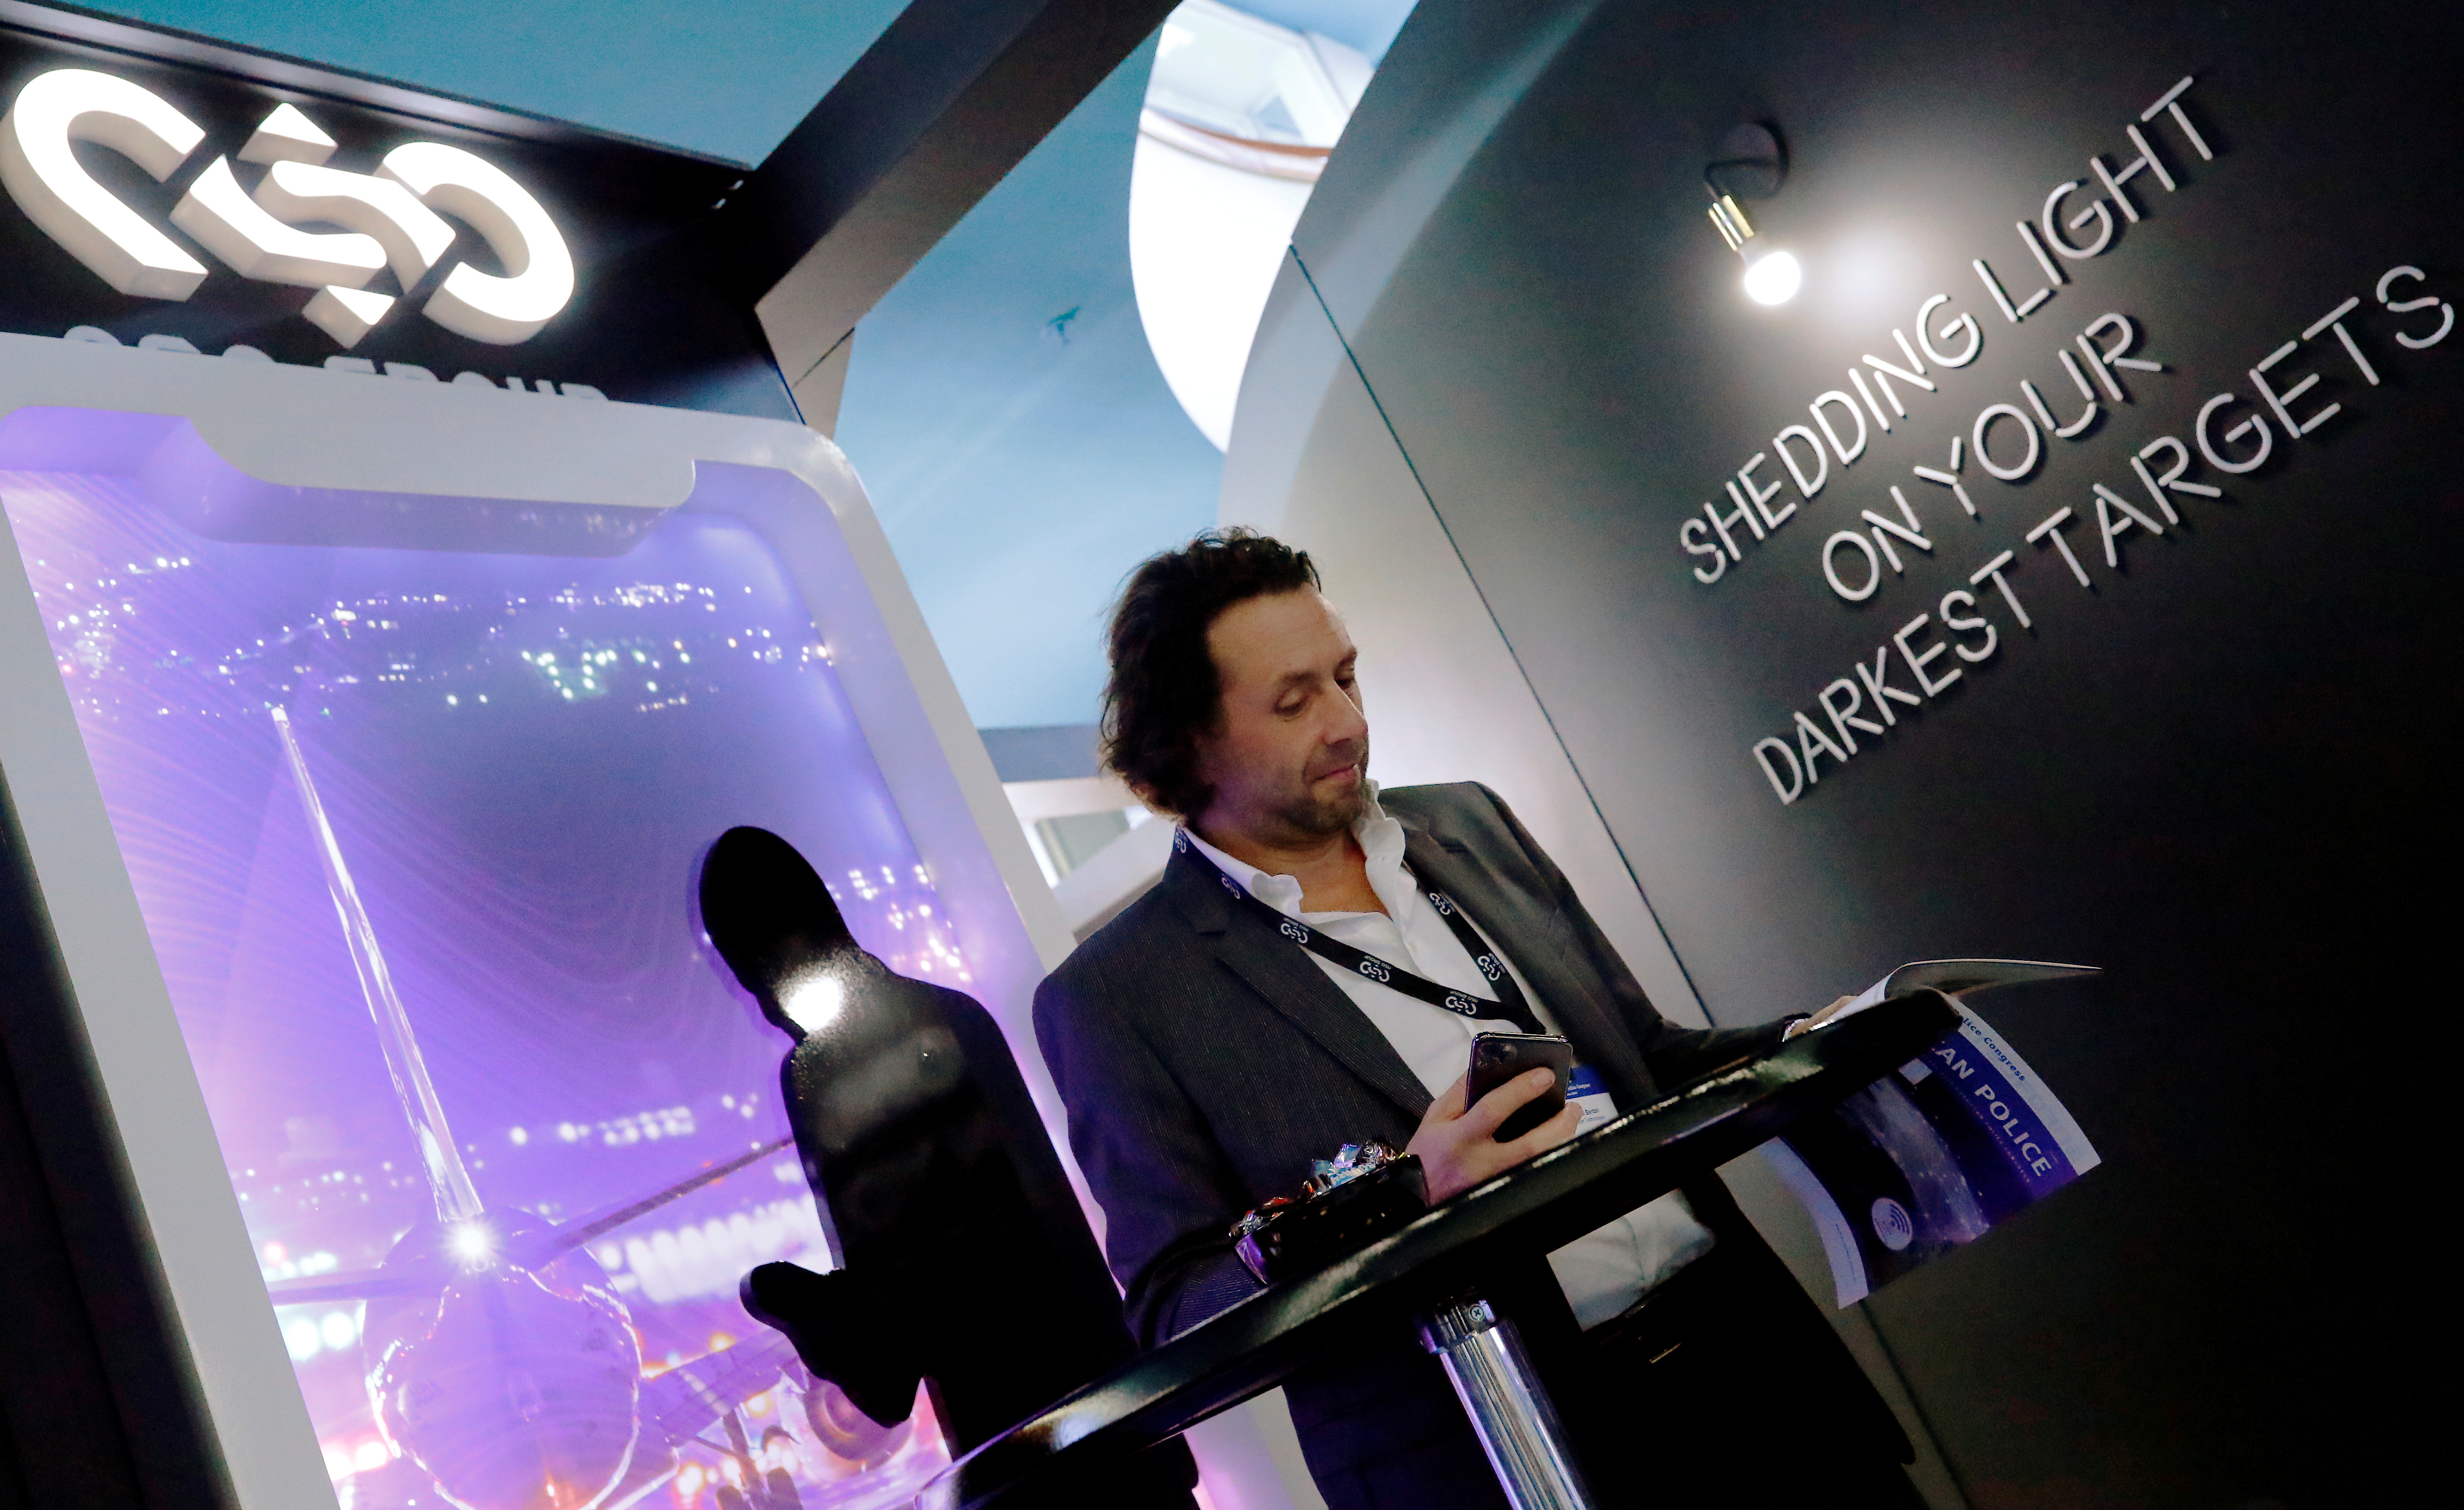 A man reads at a stand of the NSO Group Technologies, an Israeli technology firm known for its Pegasus spyware enabling the remote surveillance of smartphones, at the annual European Police Congress in Berlin